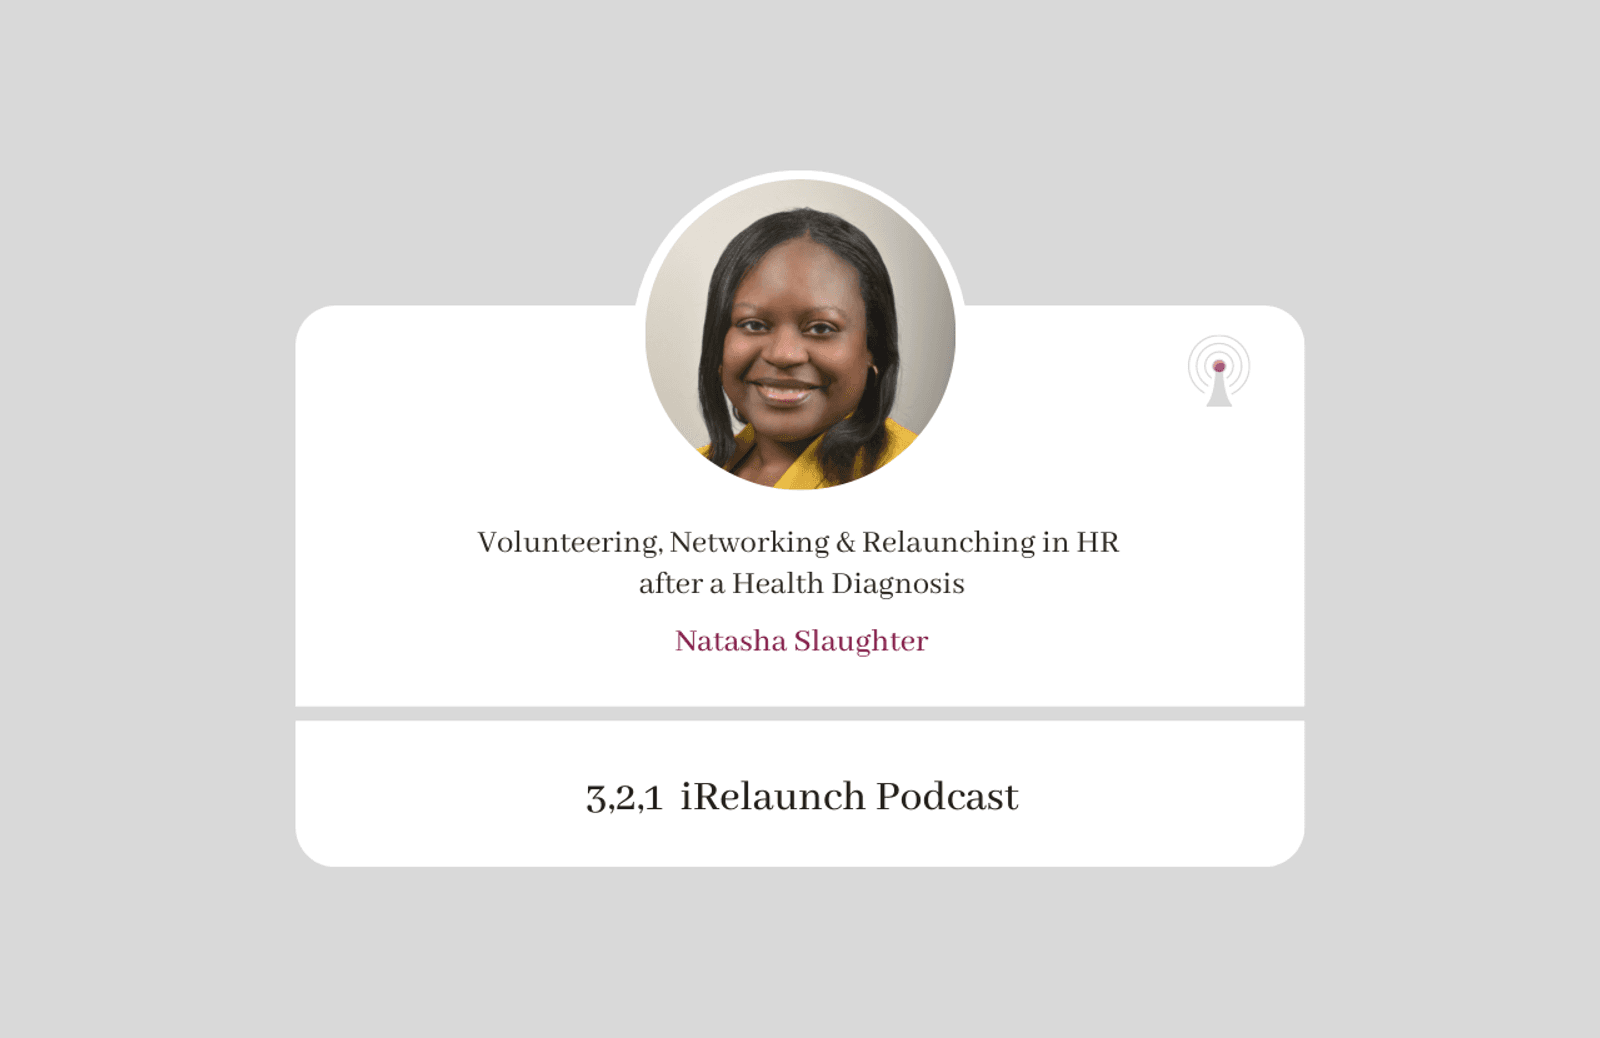 3, 2, 1 iRelaunch Podcast Thumbnail for Episode #193 with Natasha Slaughter's headshot. The episode's title is: "Volunteering, Networking & Relaunching in HR after a Health Diagnosis"